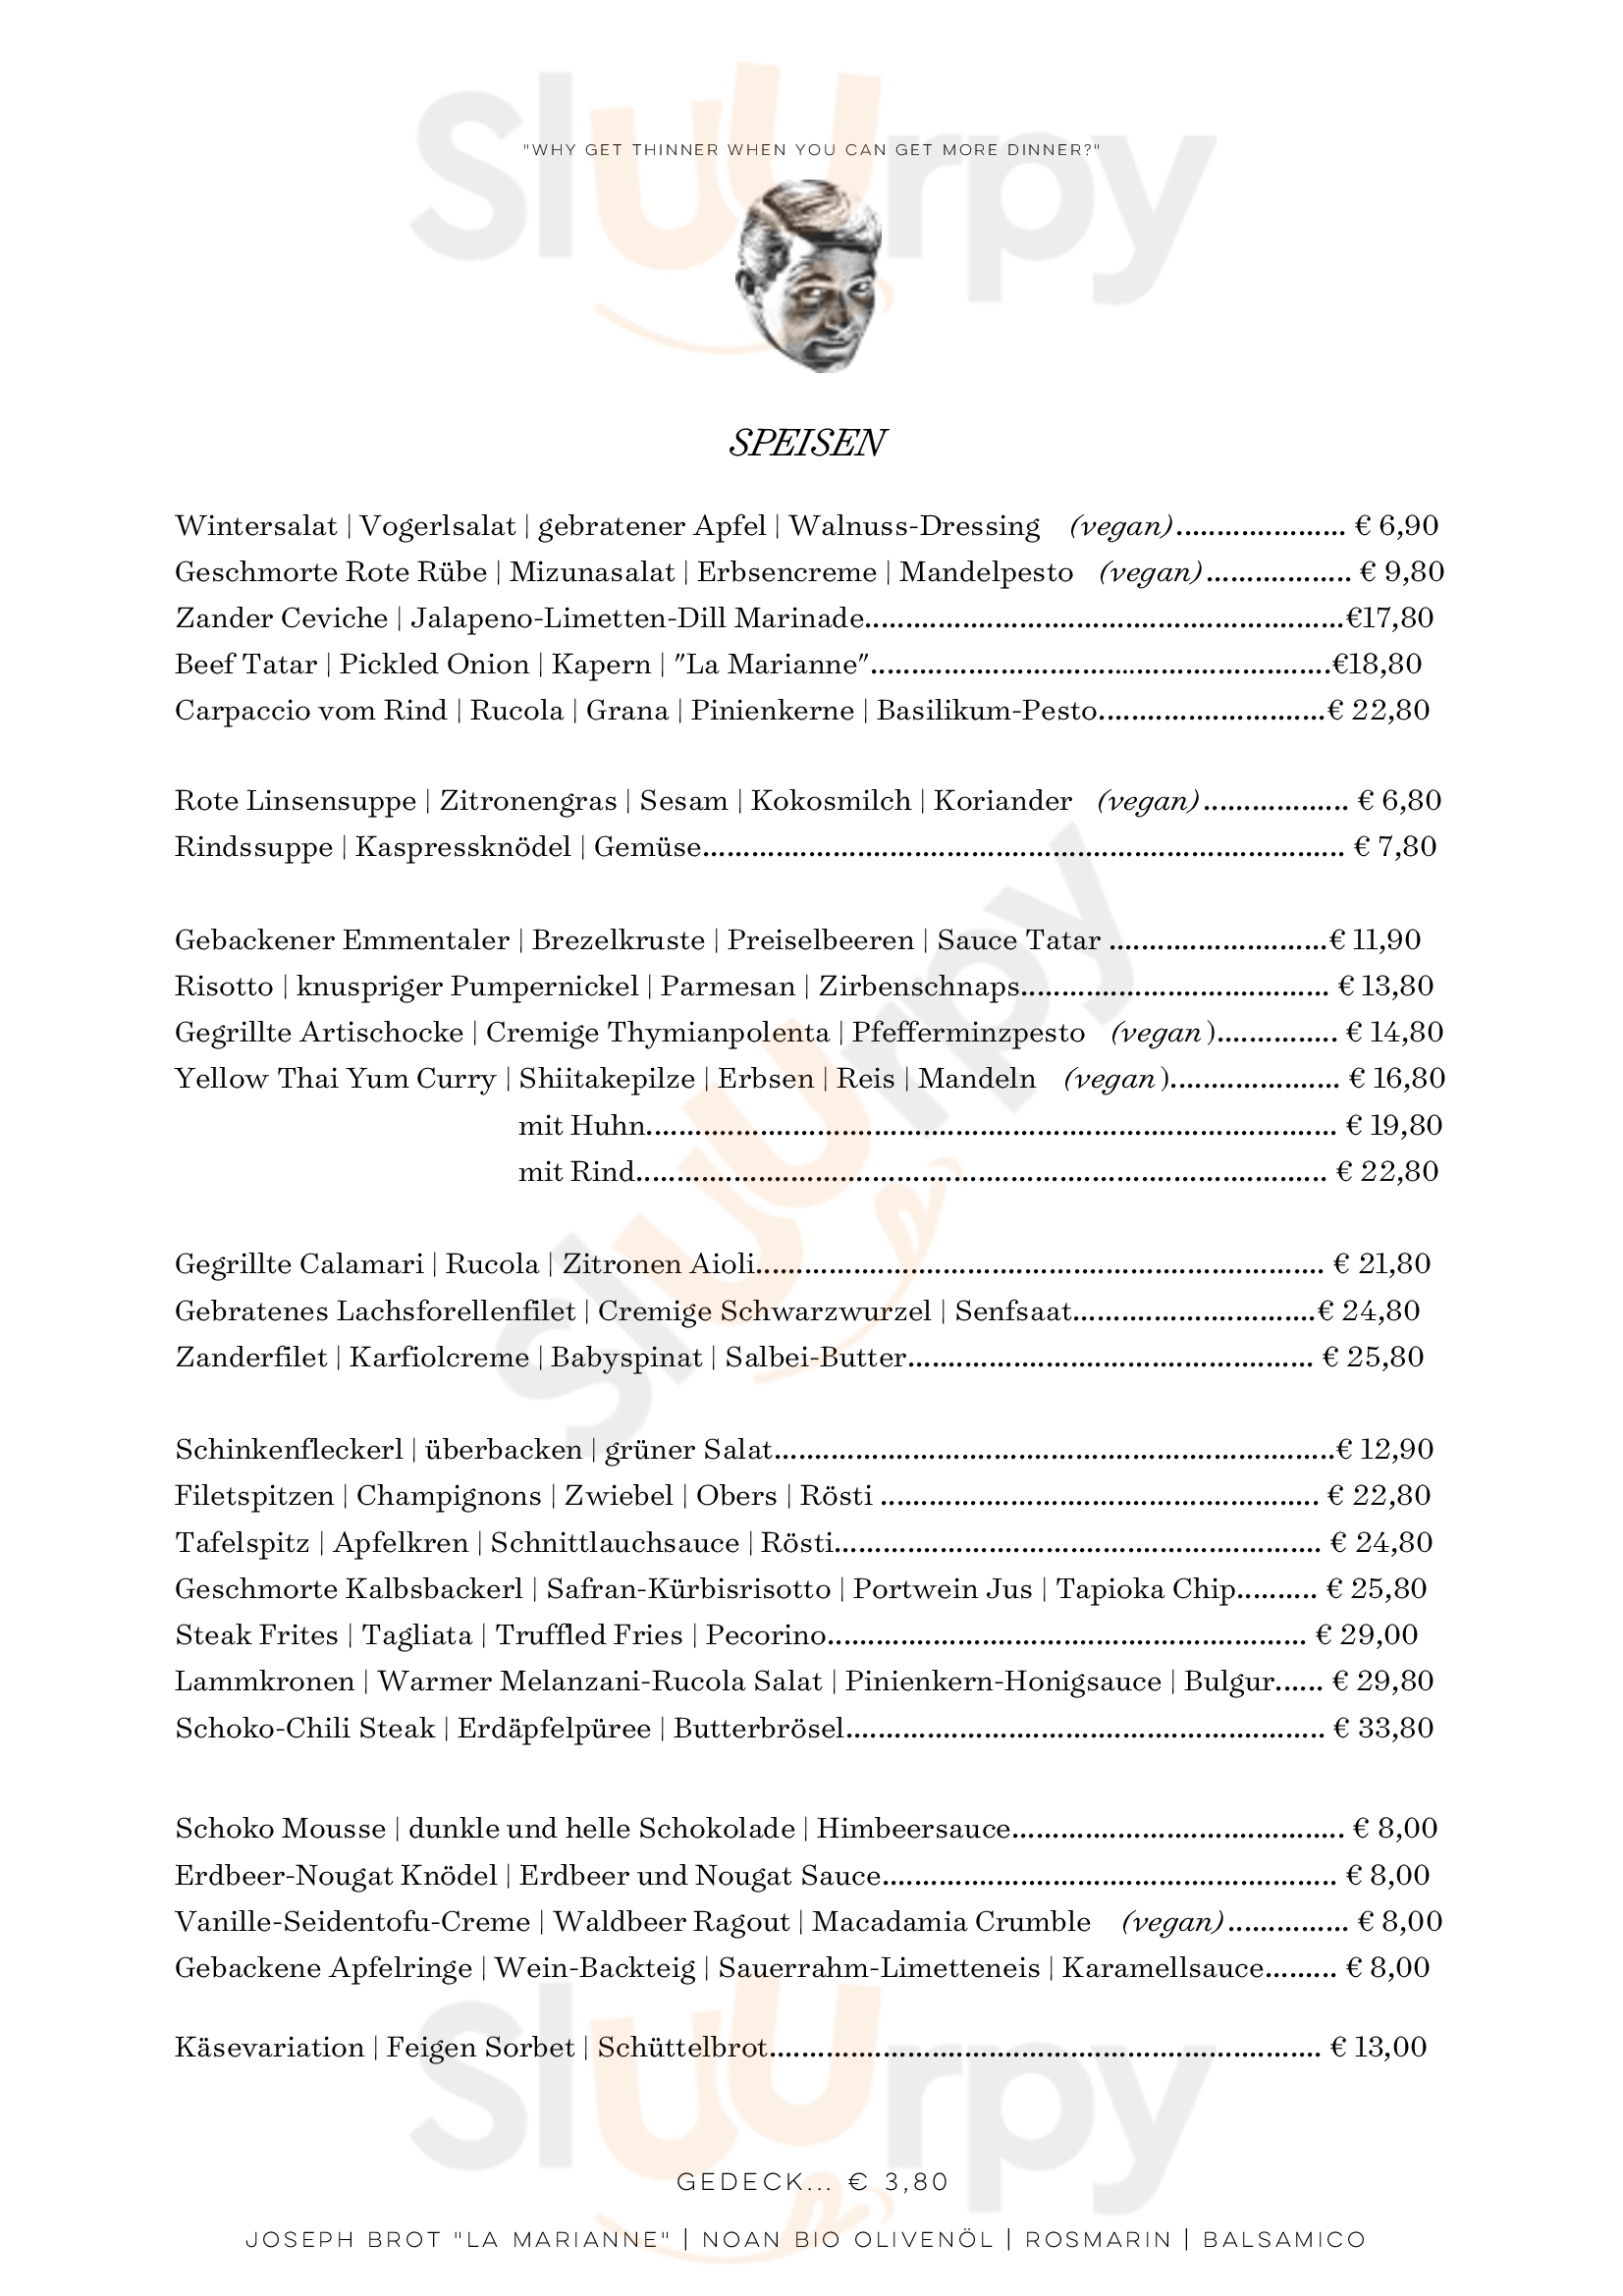 Thell | Restaurant & Bar Formerly Known As Motto Wien Menu - 1